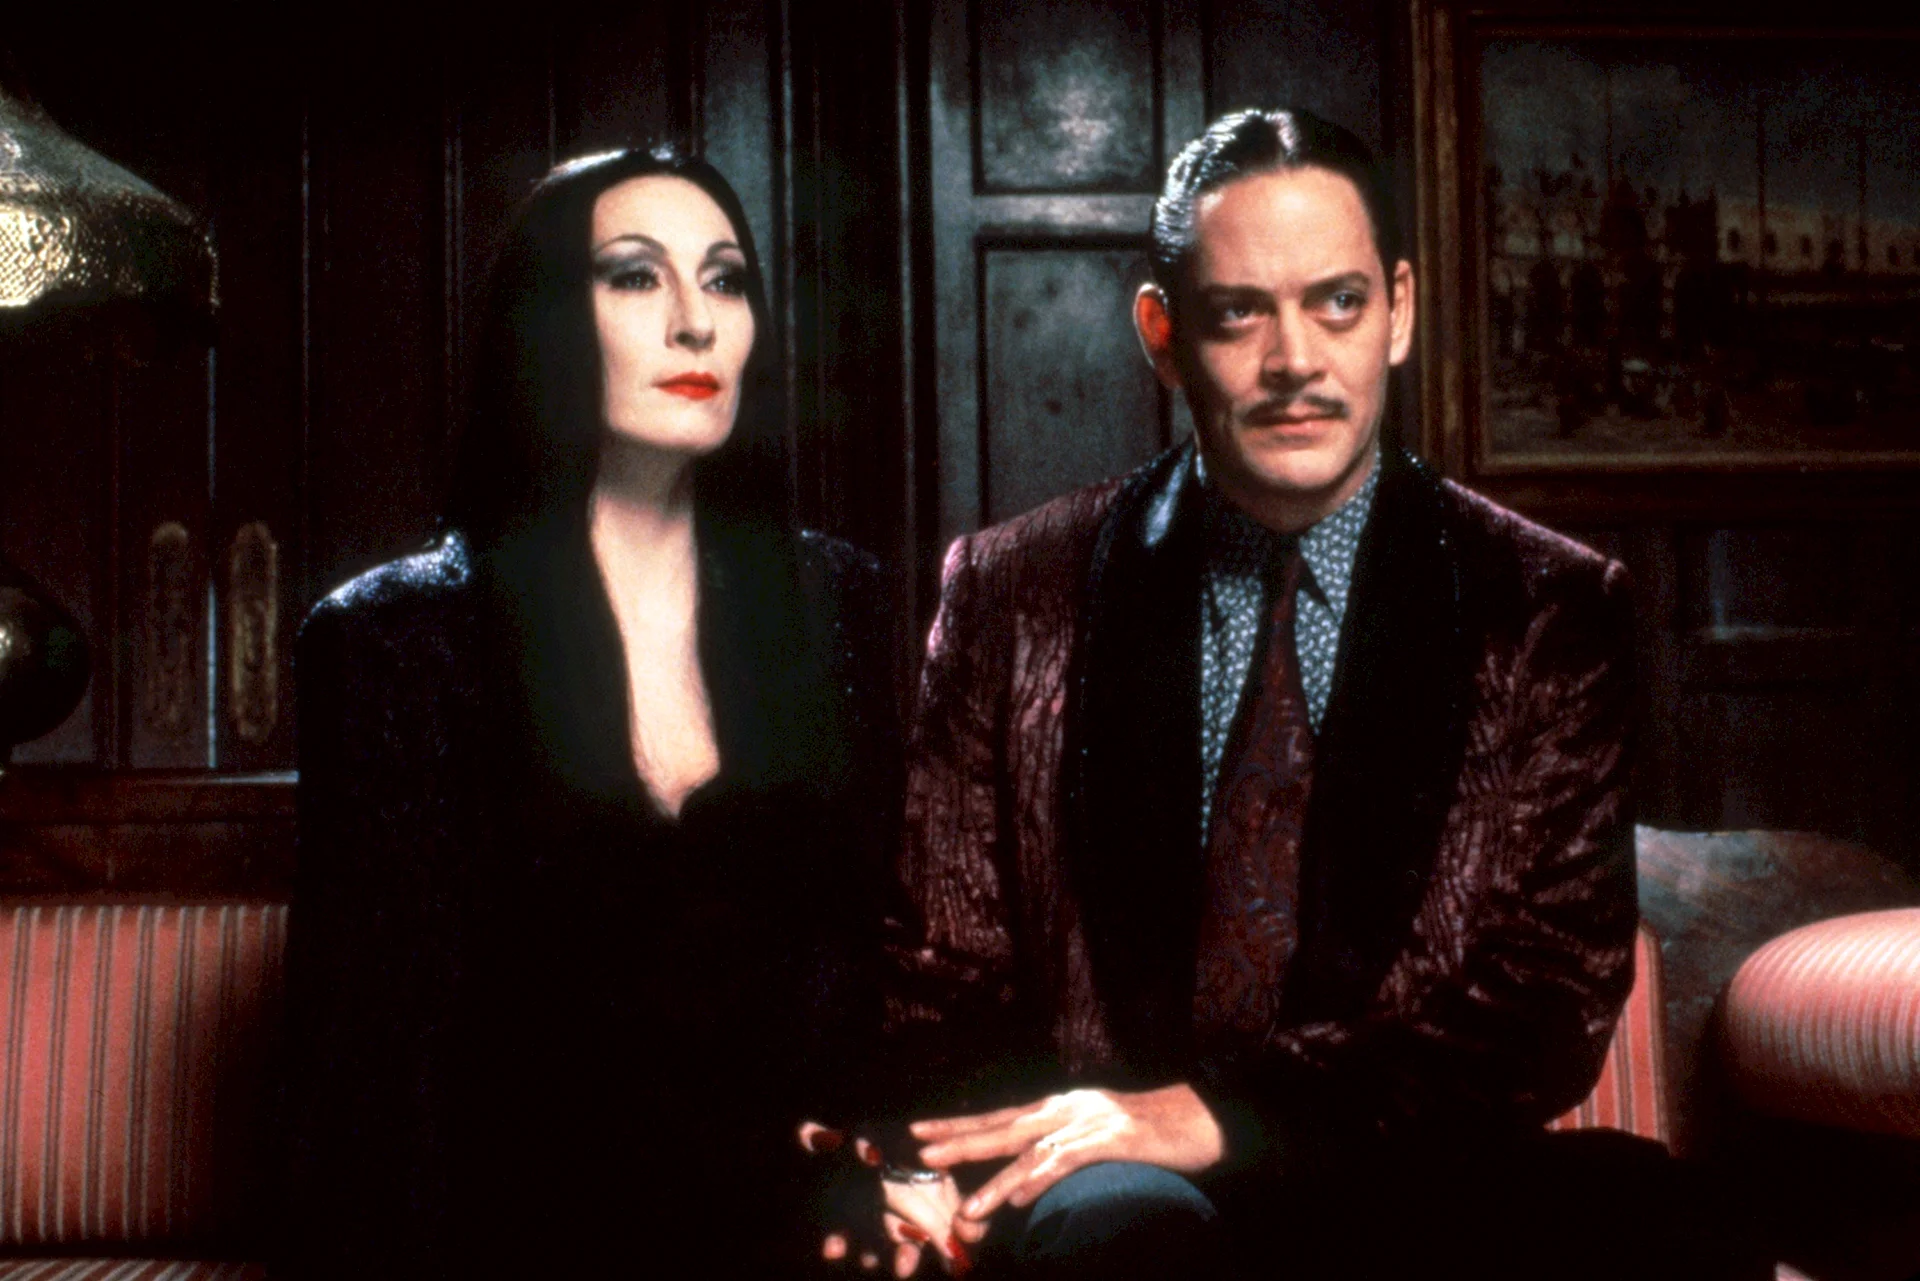 The Addams Family Film 1991 Wallpaper